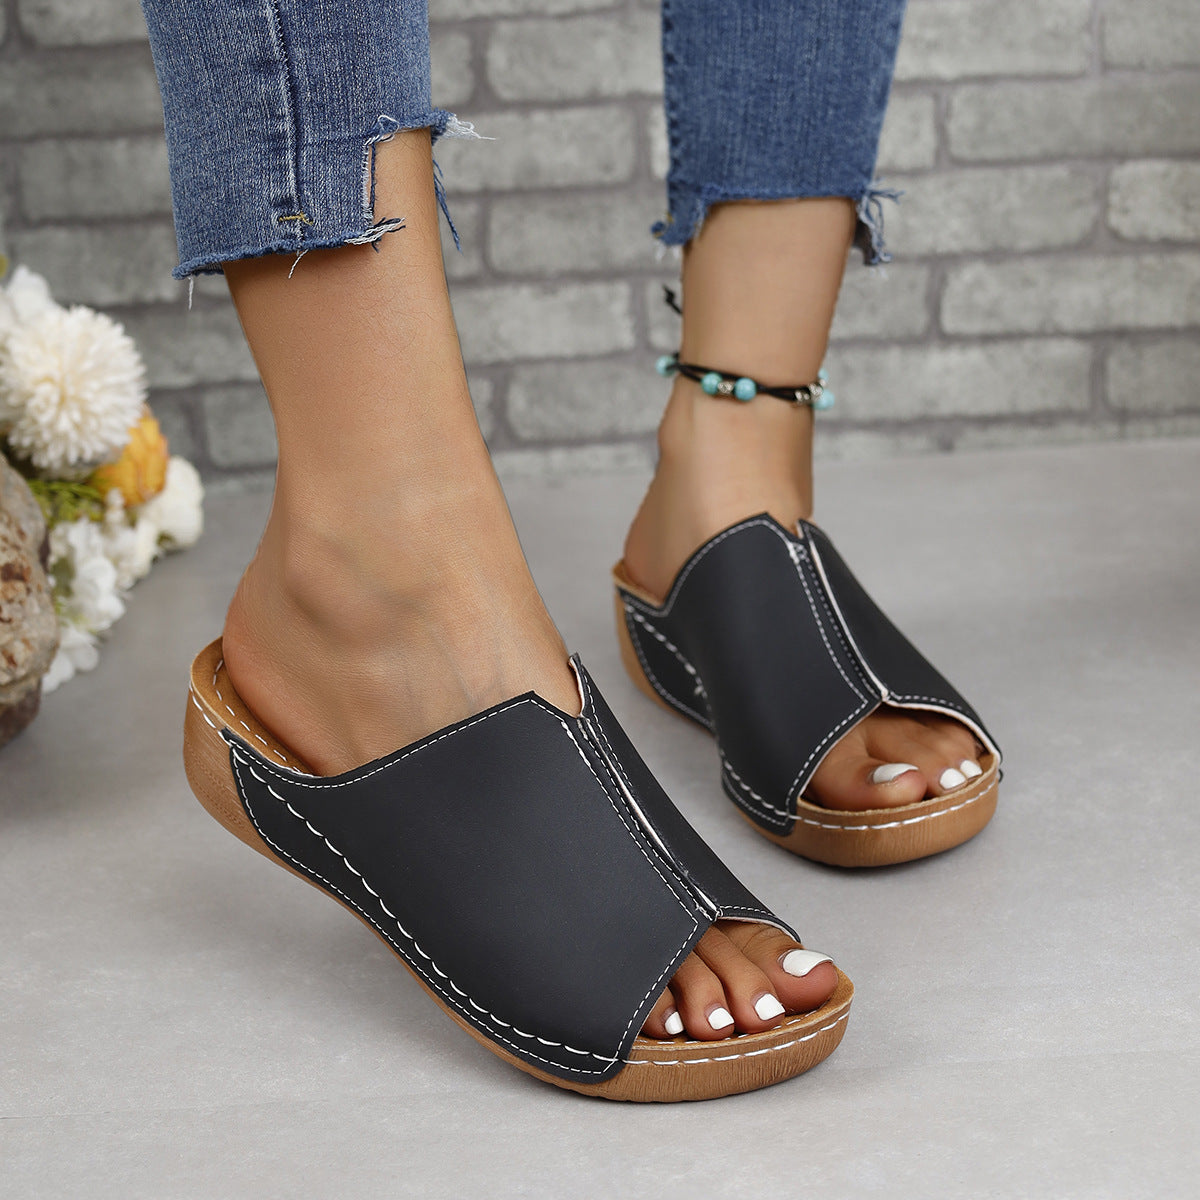 PU Leather Open Toe Sandals - House of Binx 